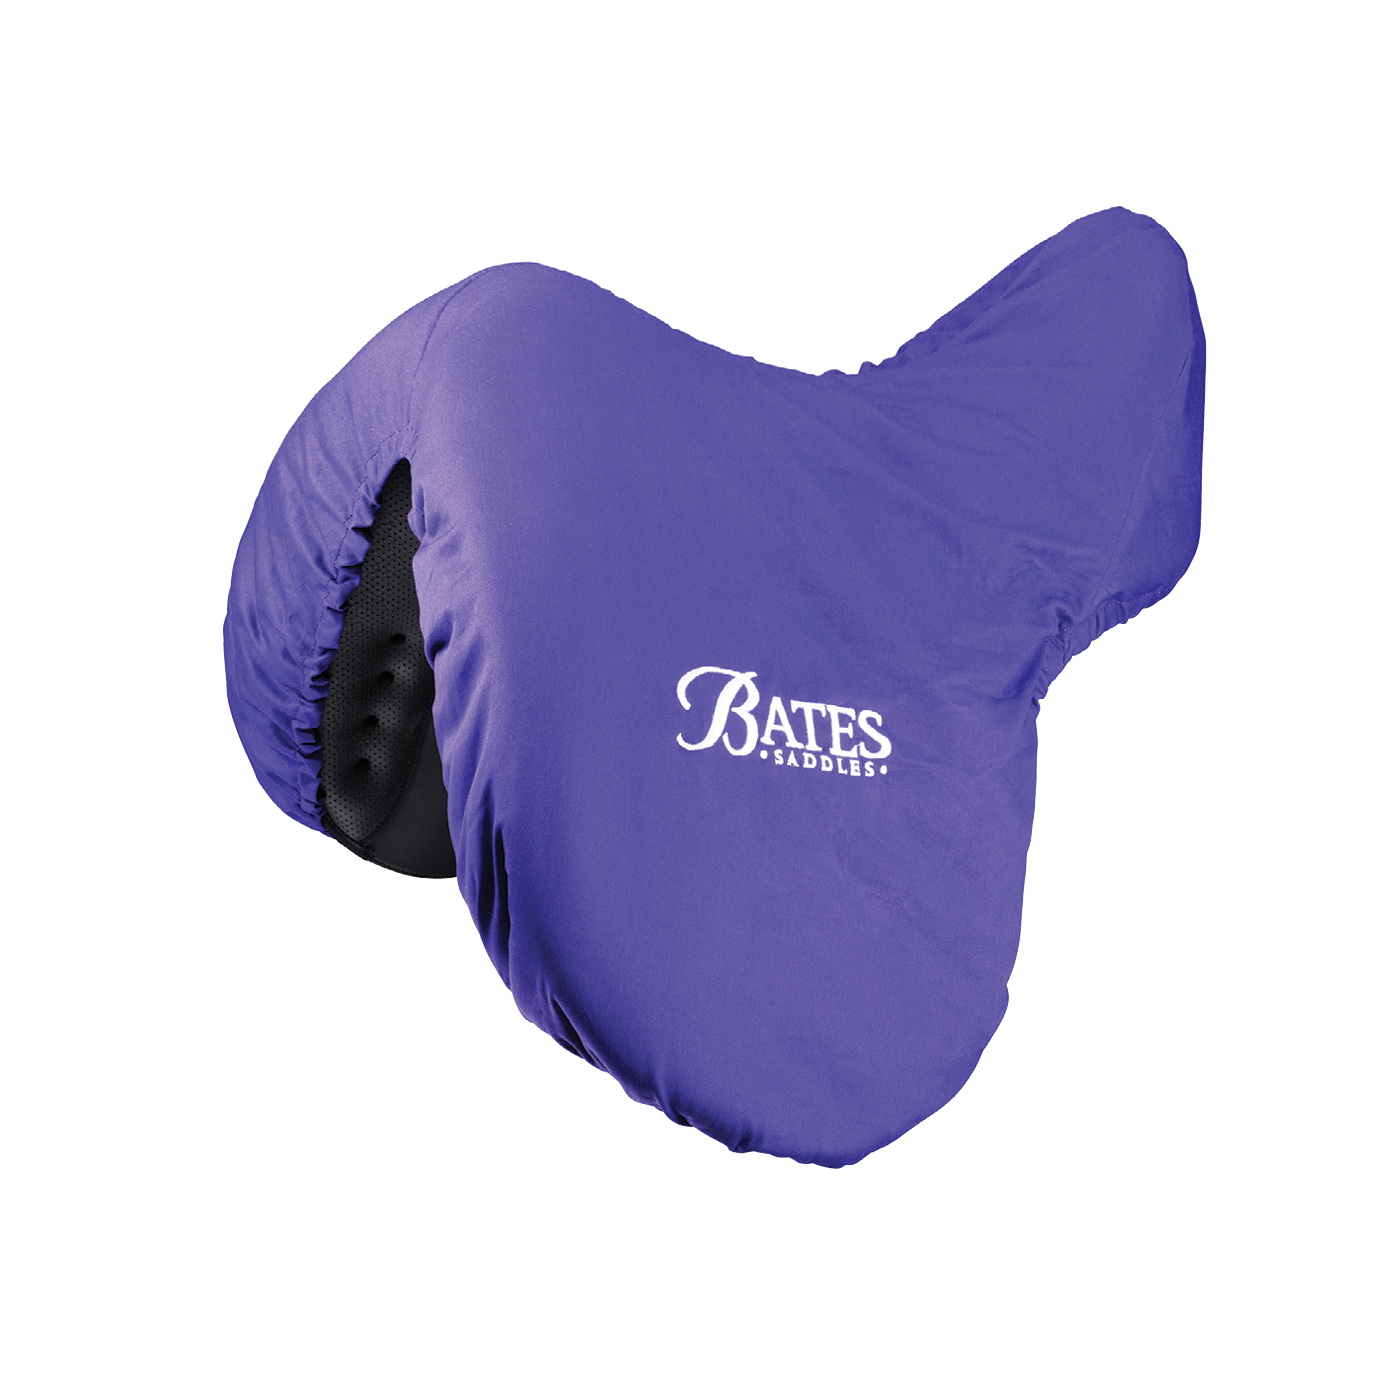 Bates Deluxe Saddle Cover - 619:32426558160956